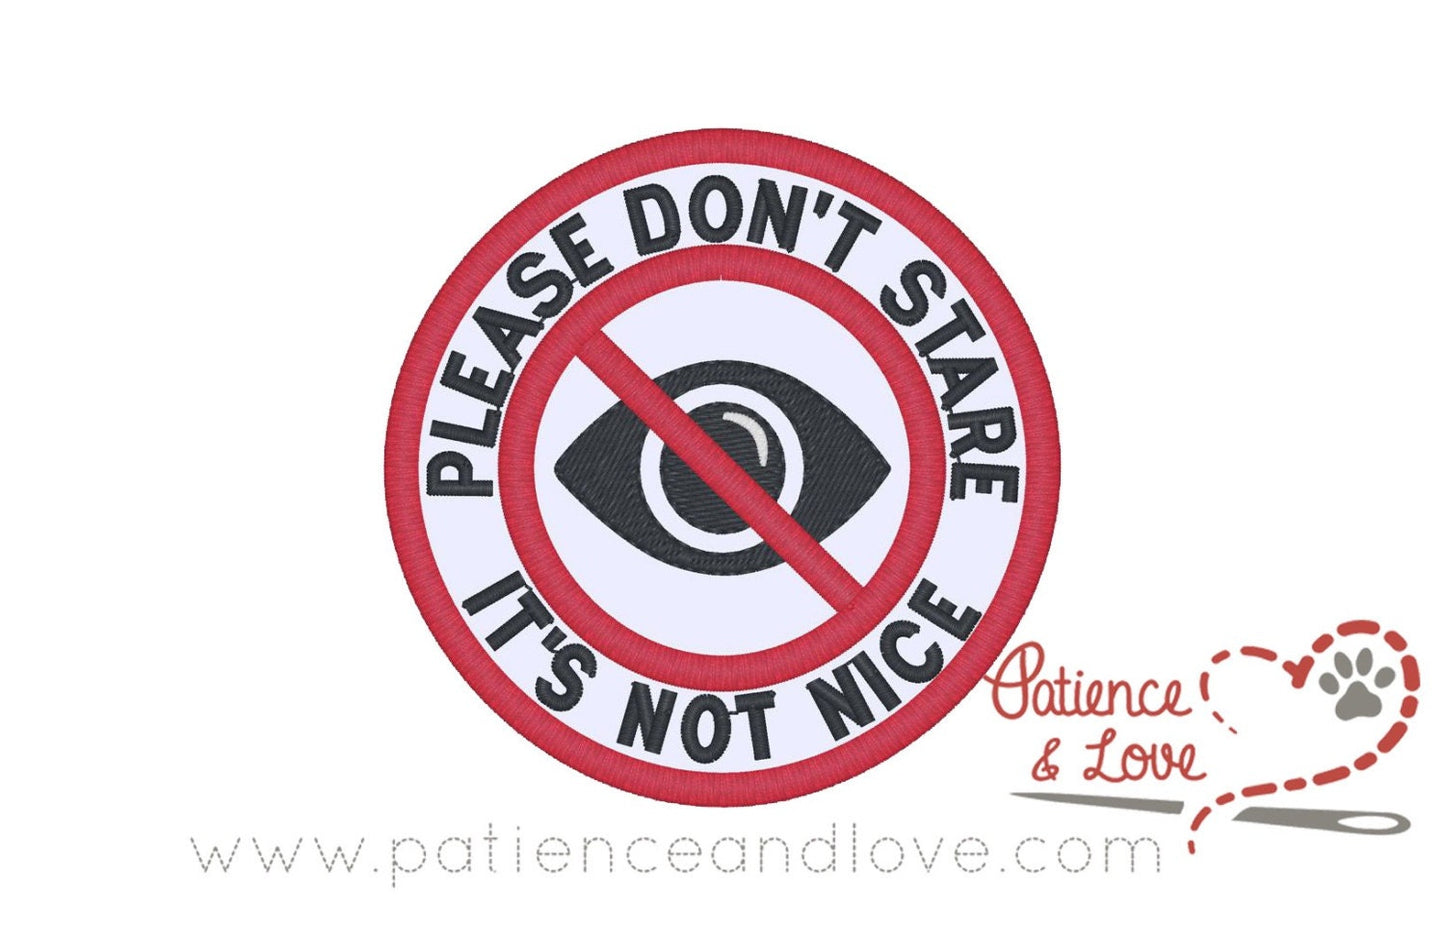 Please Don't Stare - It's Not Nice with crossed out eye in the center, 3 inch round patch